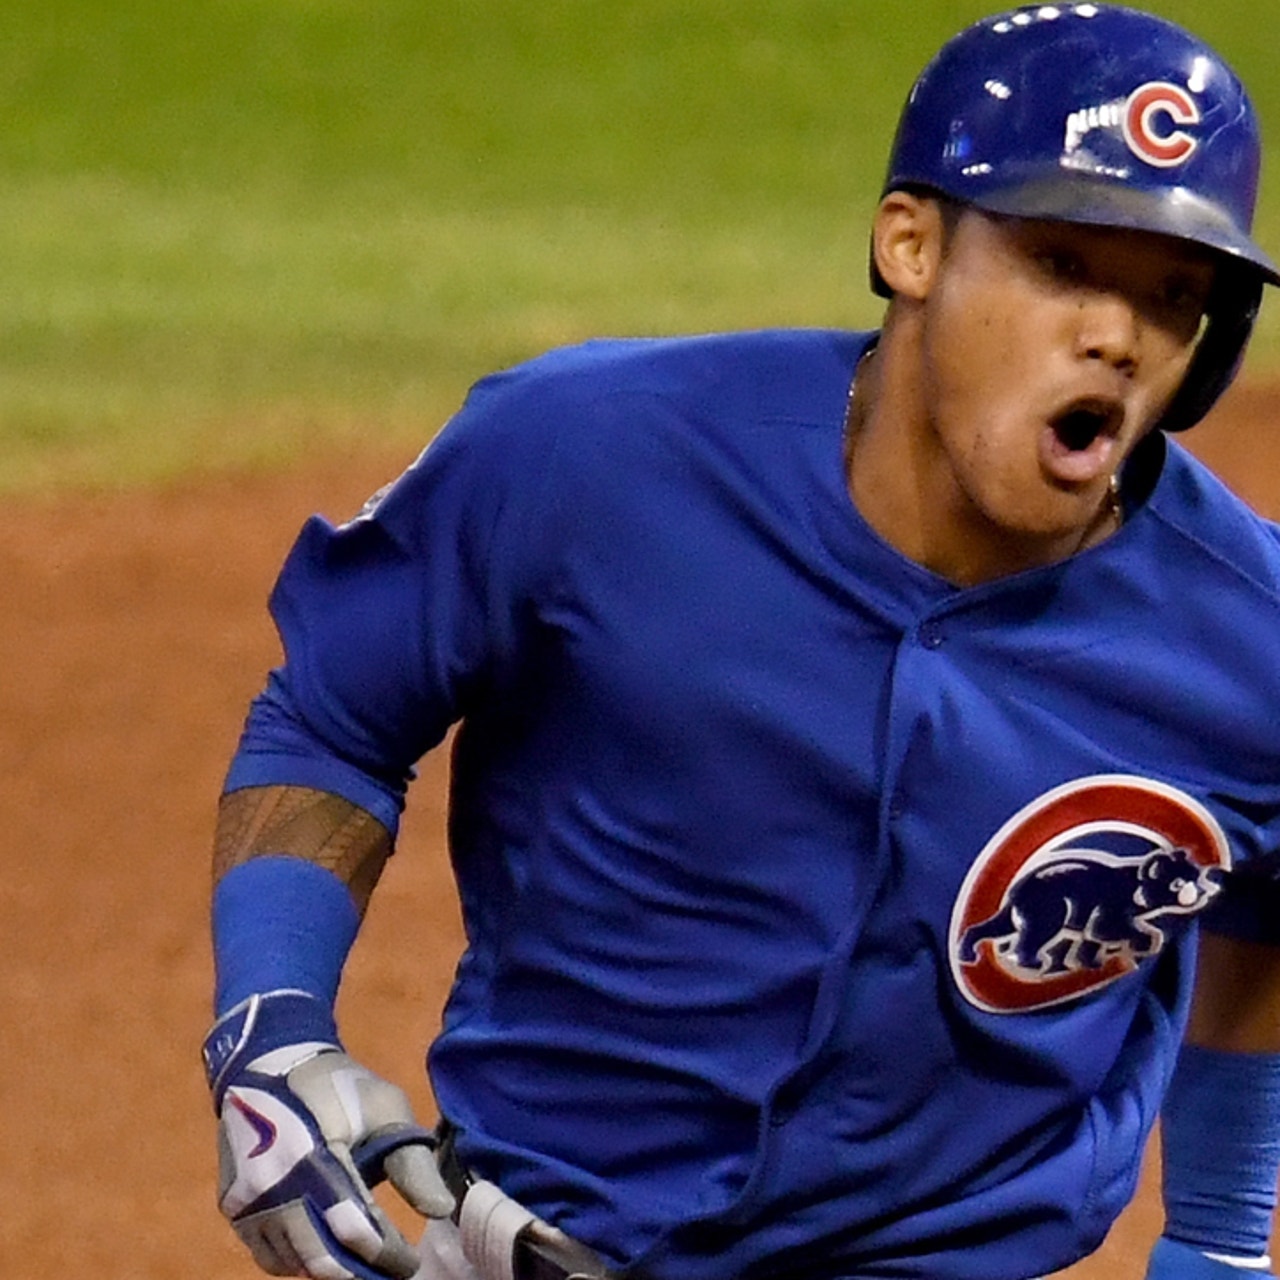 Addison Russell grand slam leads Cubs, forces Game 7